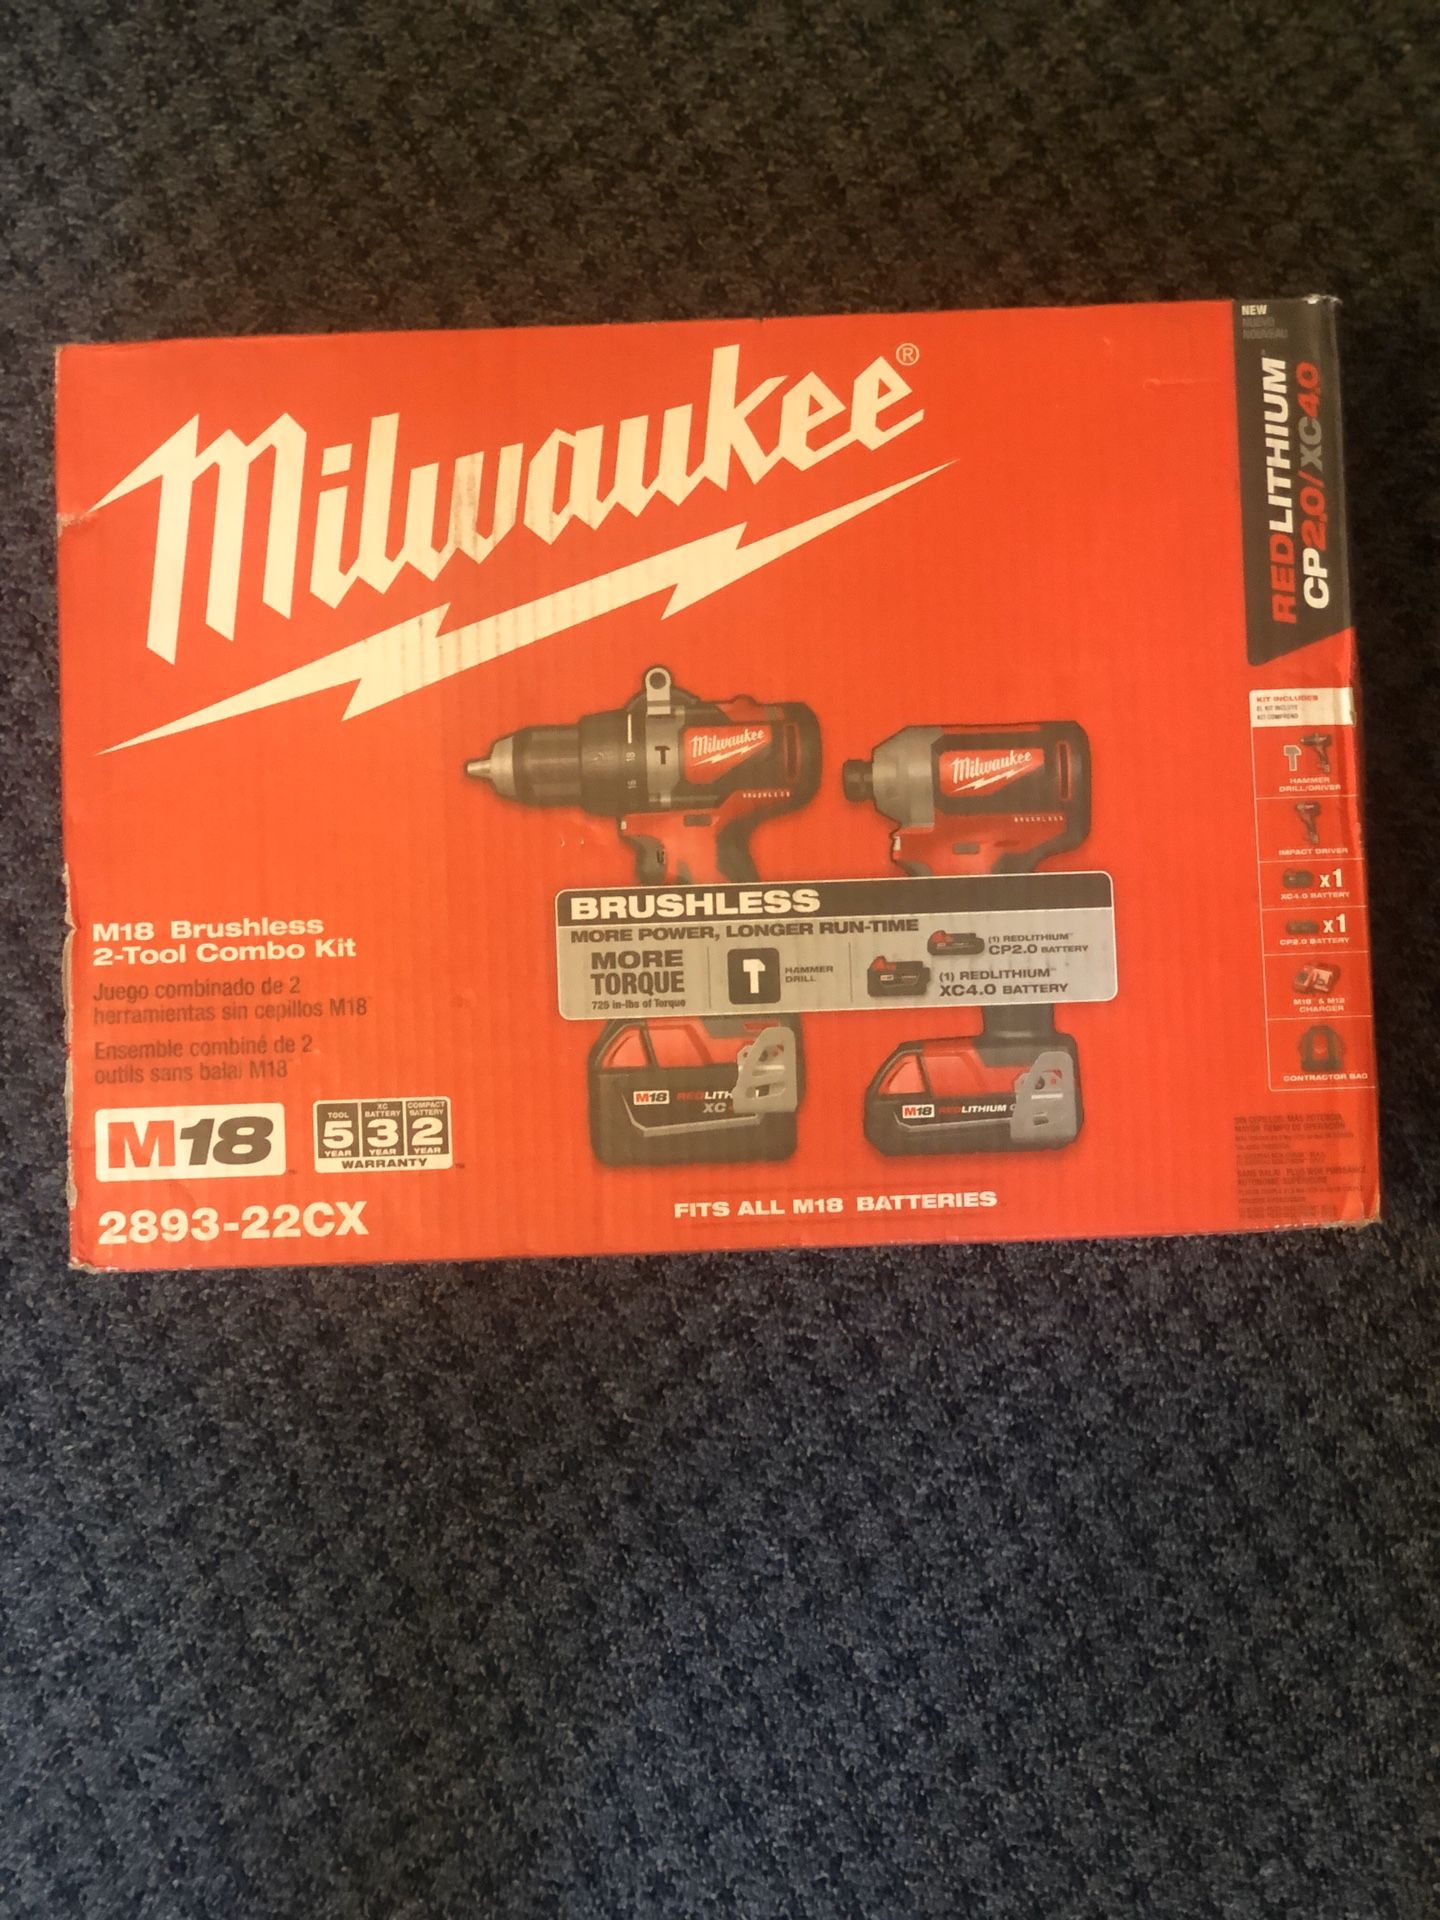 Milwaukee m18 (2893-22cx) hammer drill and impact drill set with batteries